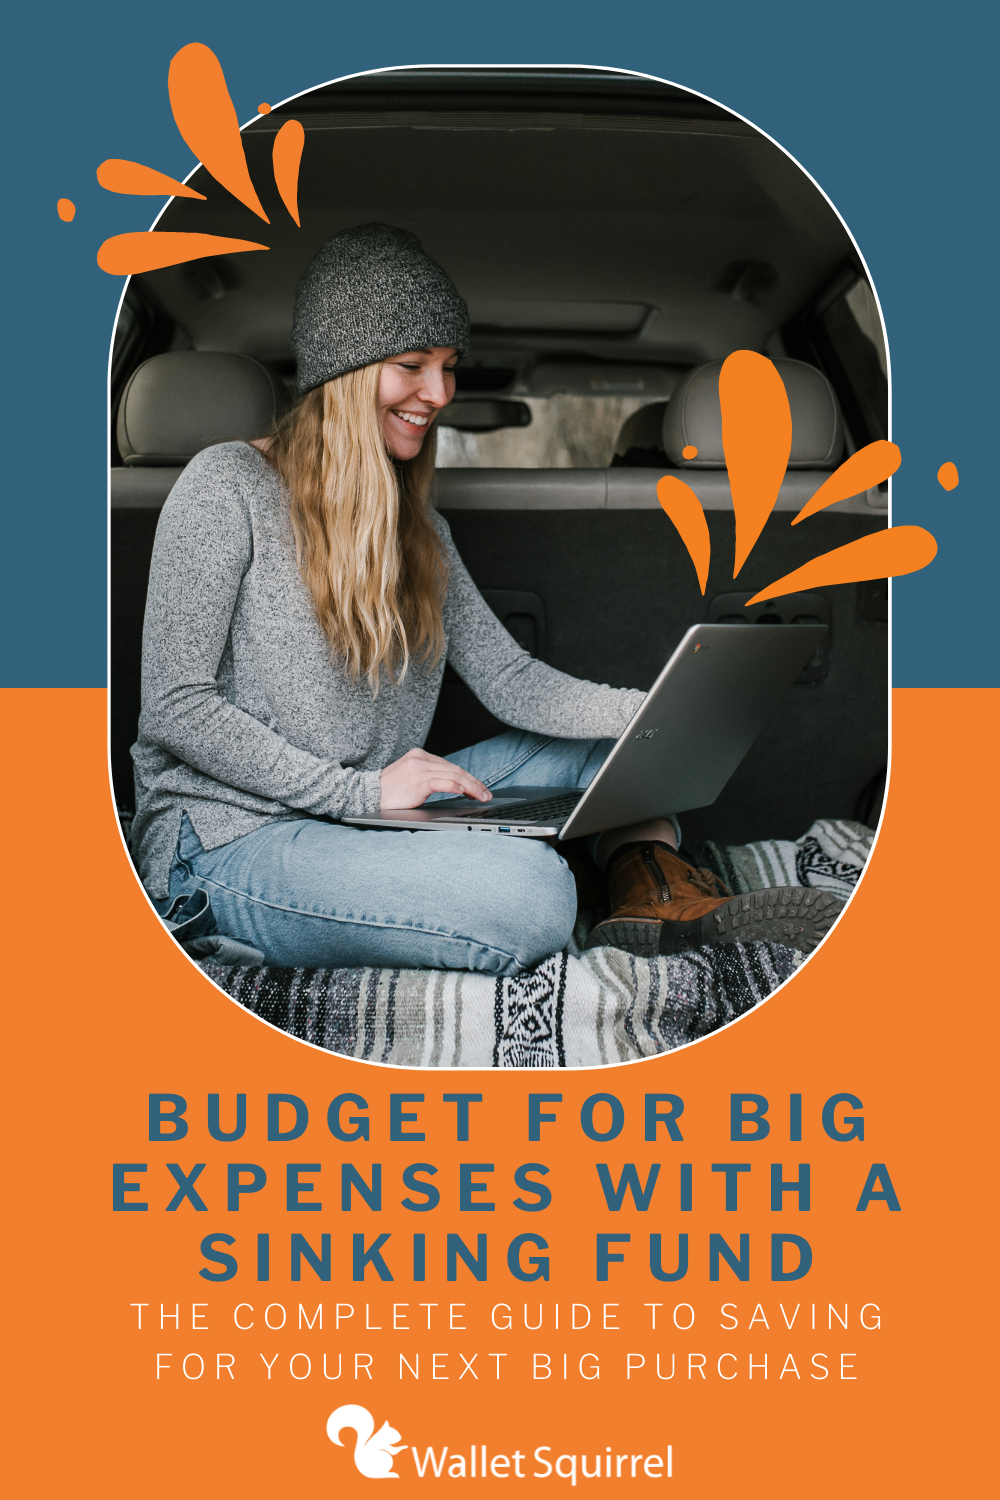 Budget for Big Expenses With a Sinking Fund